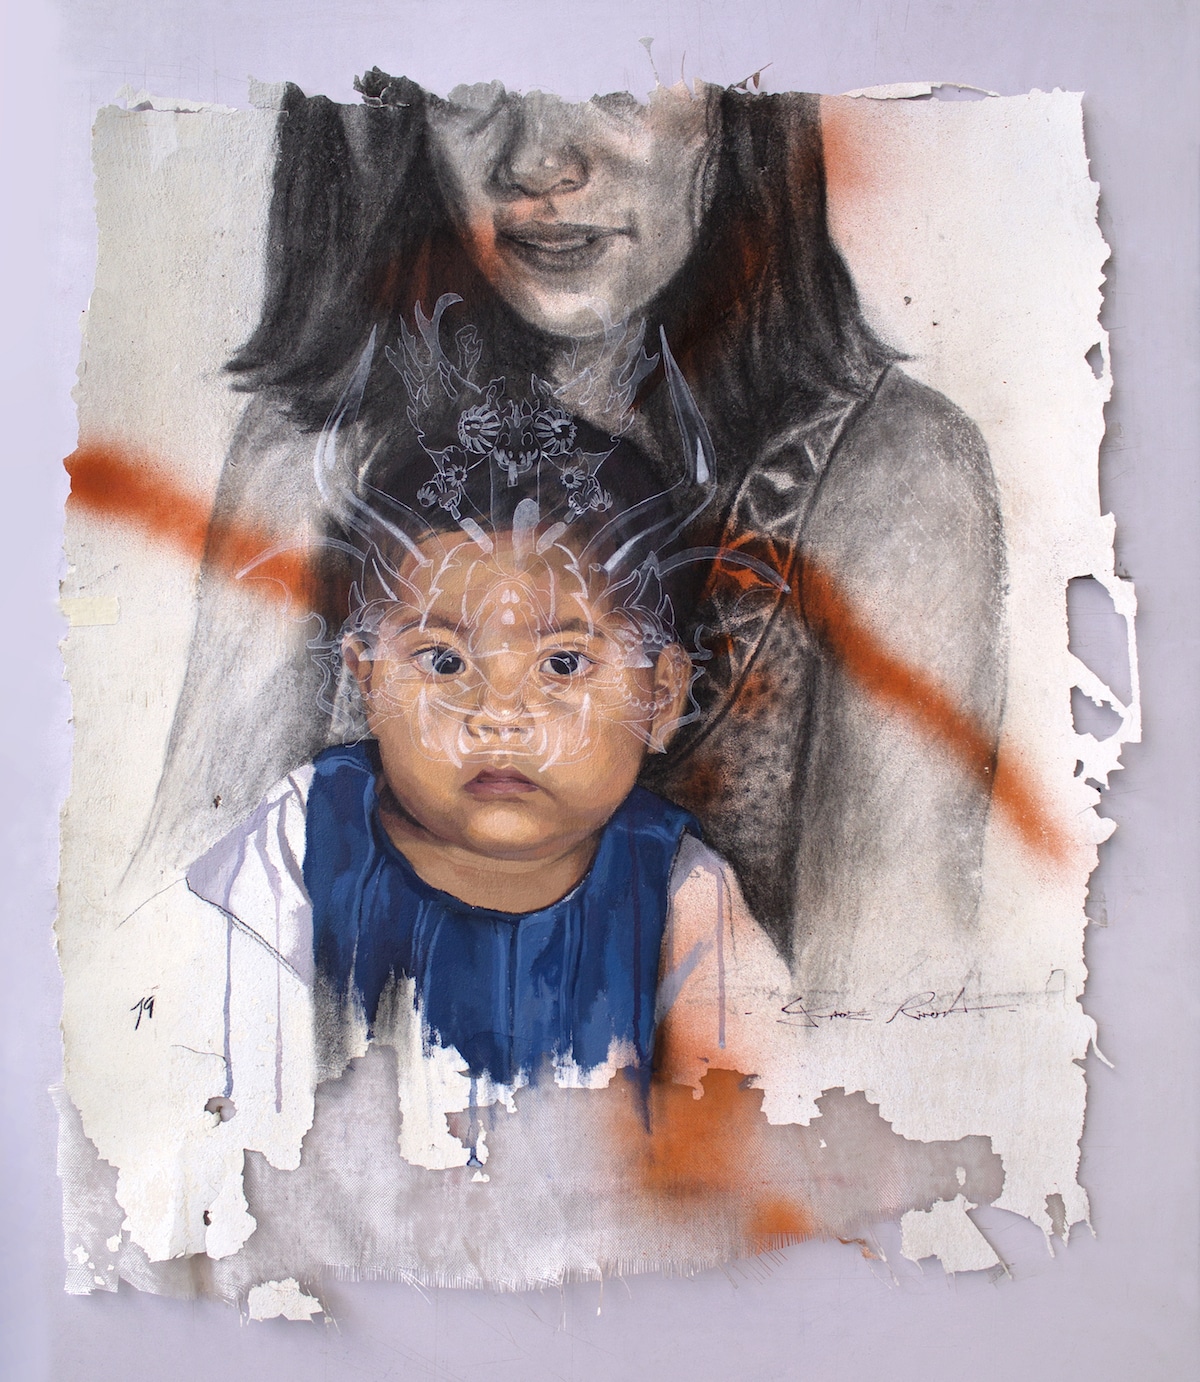 Mother and Child Group Art Exhibition at Dorothy Circus Gallery